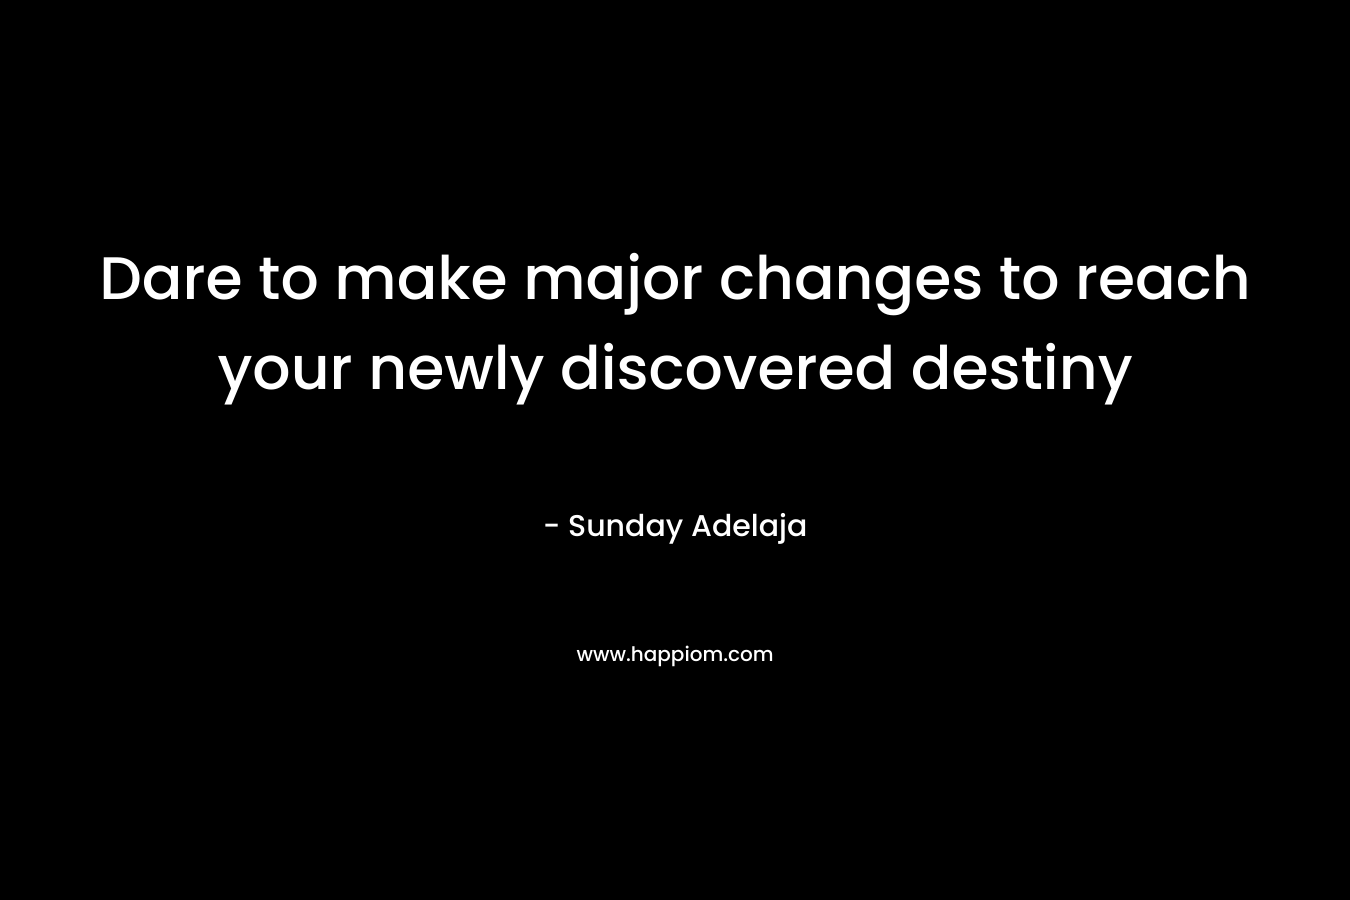 Dare to make major changes to reach your newly discovered destiny